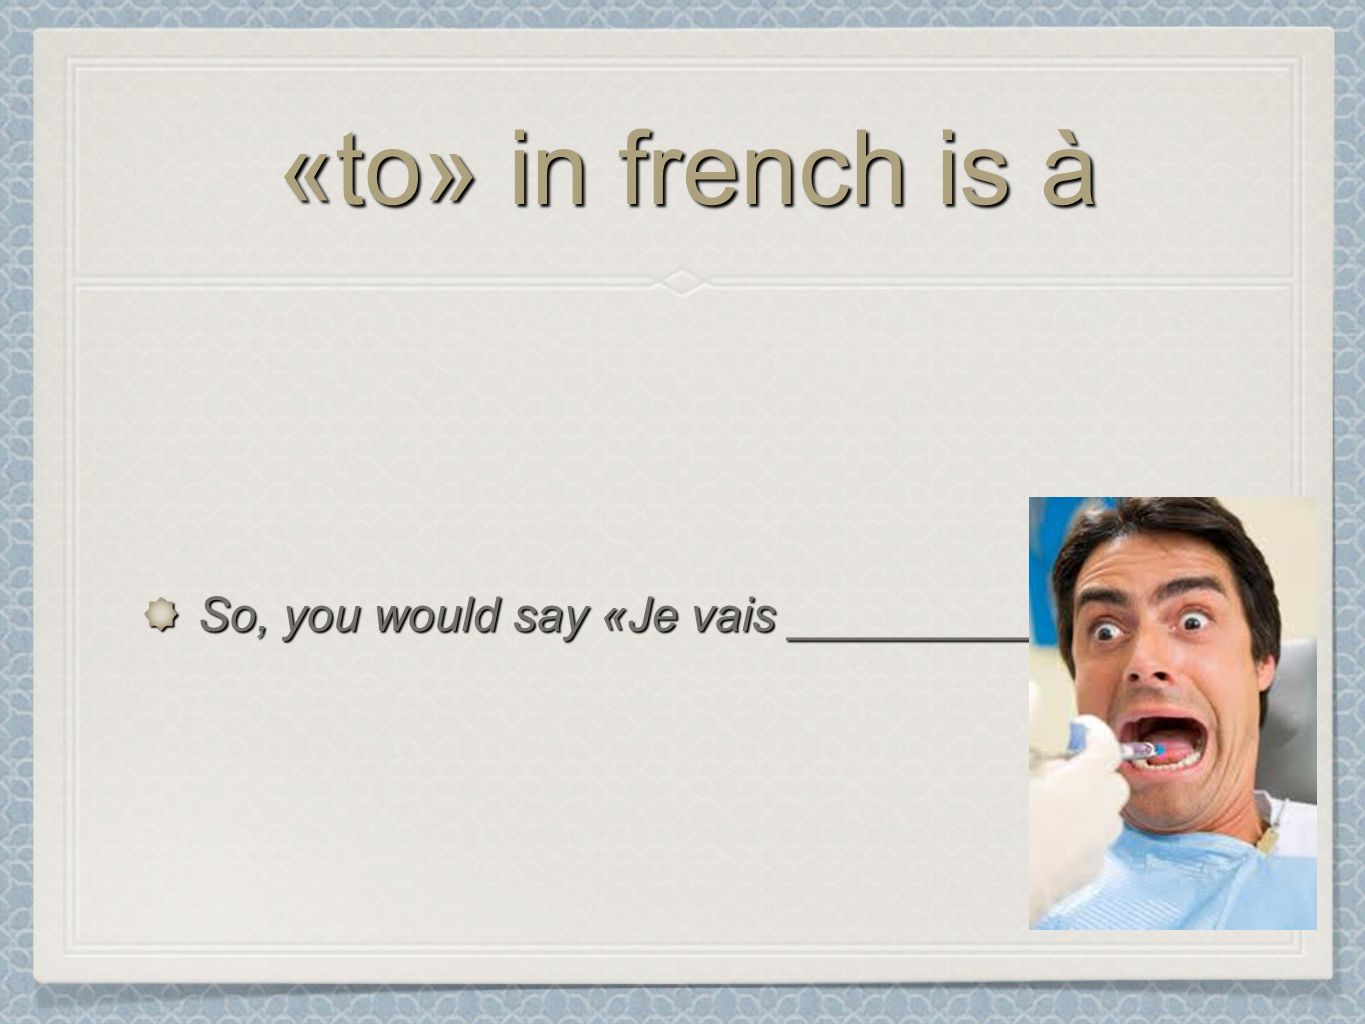 «to» in french is à So, you would say «Je vais _________la fête.»